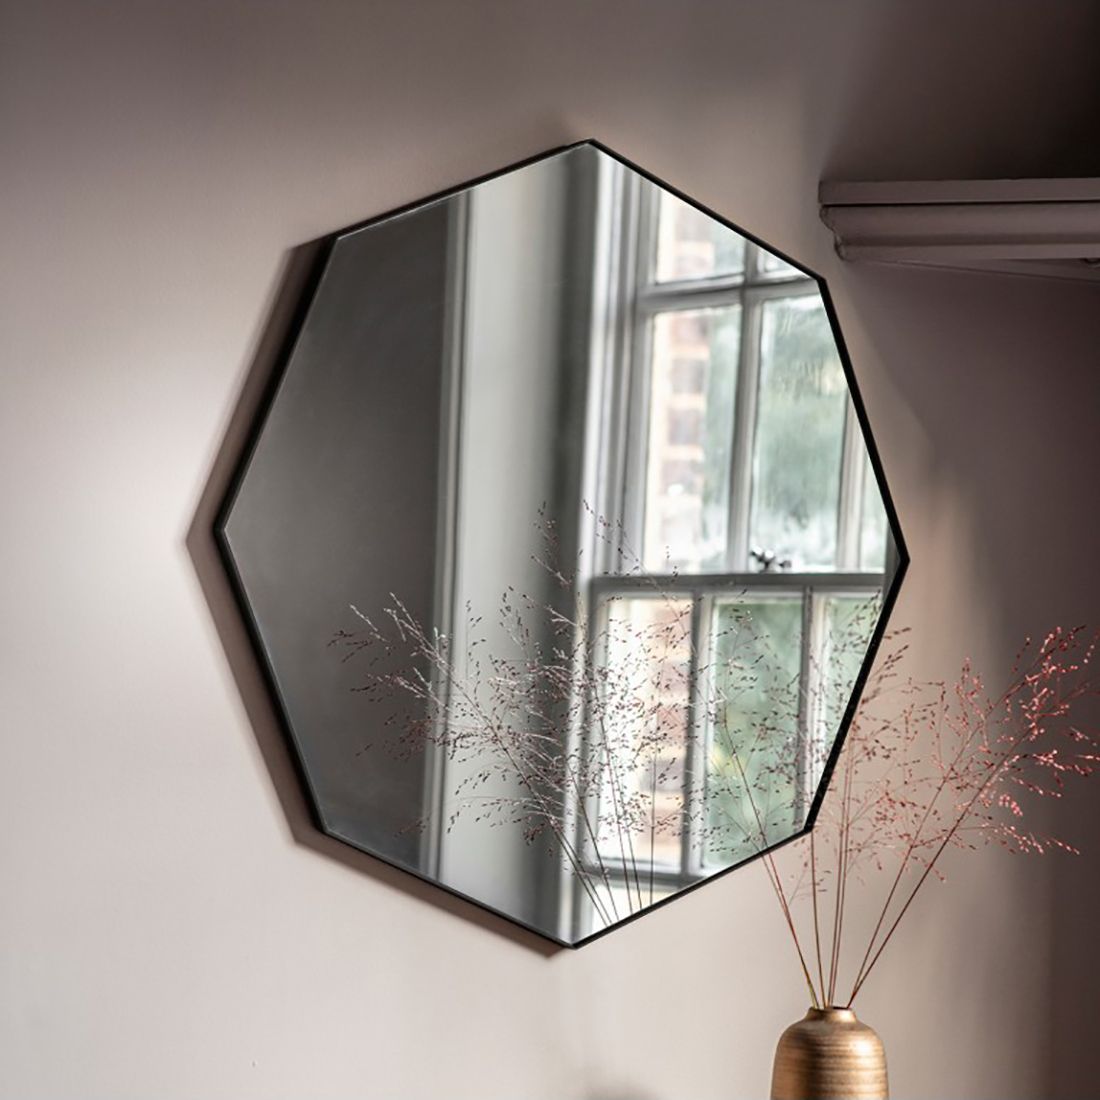 Newest Black Metal Octagonal Wall Mirror With Regard To Iron Wall Mirrors (View 16 of 20)